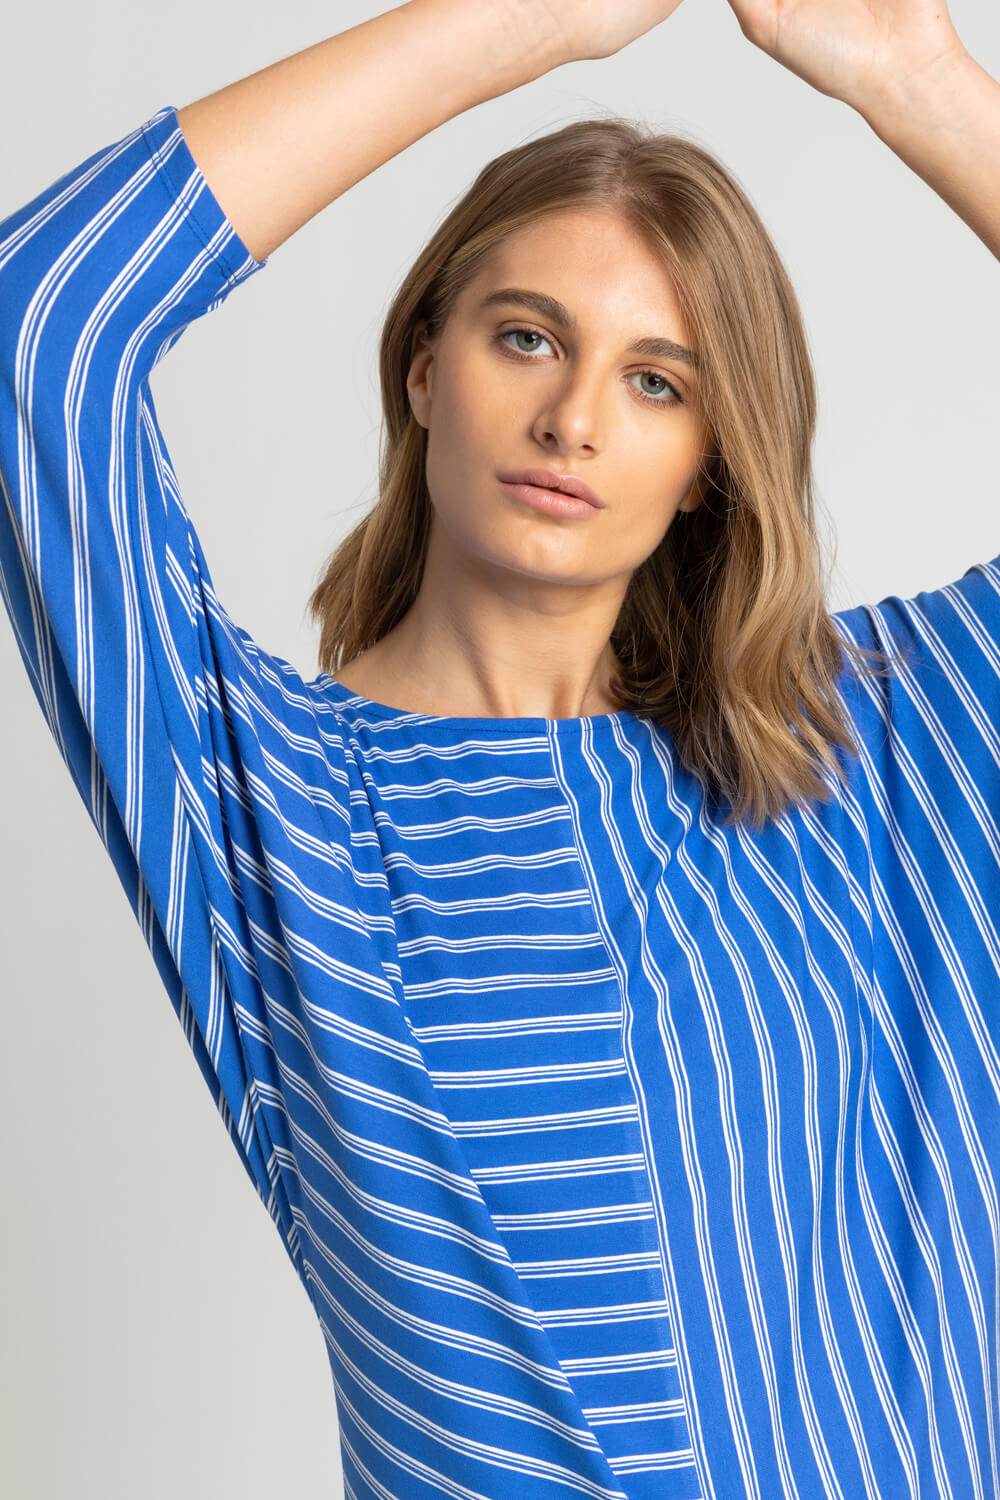 Blue Textured Stripe Print Top, Image 4 of 5